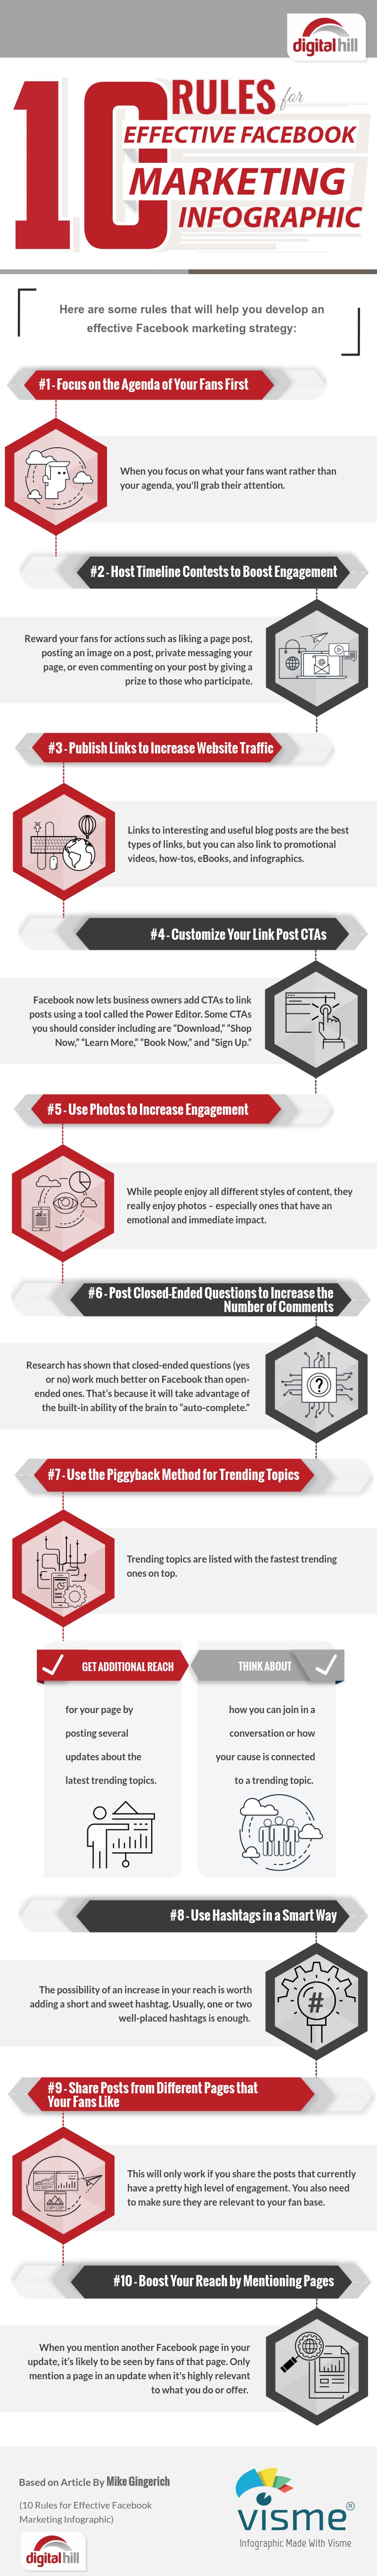 10-rules-for-effective-facebook-marketing-infographic